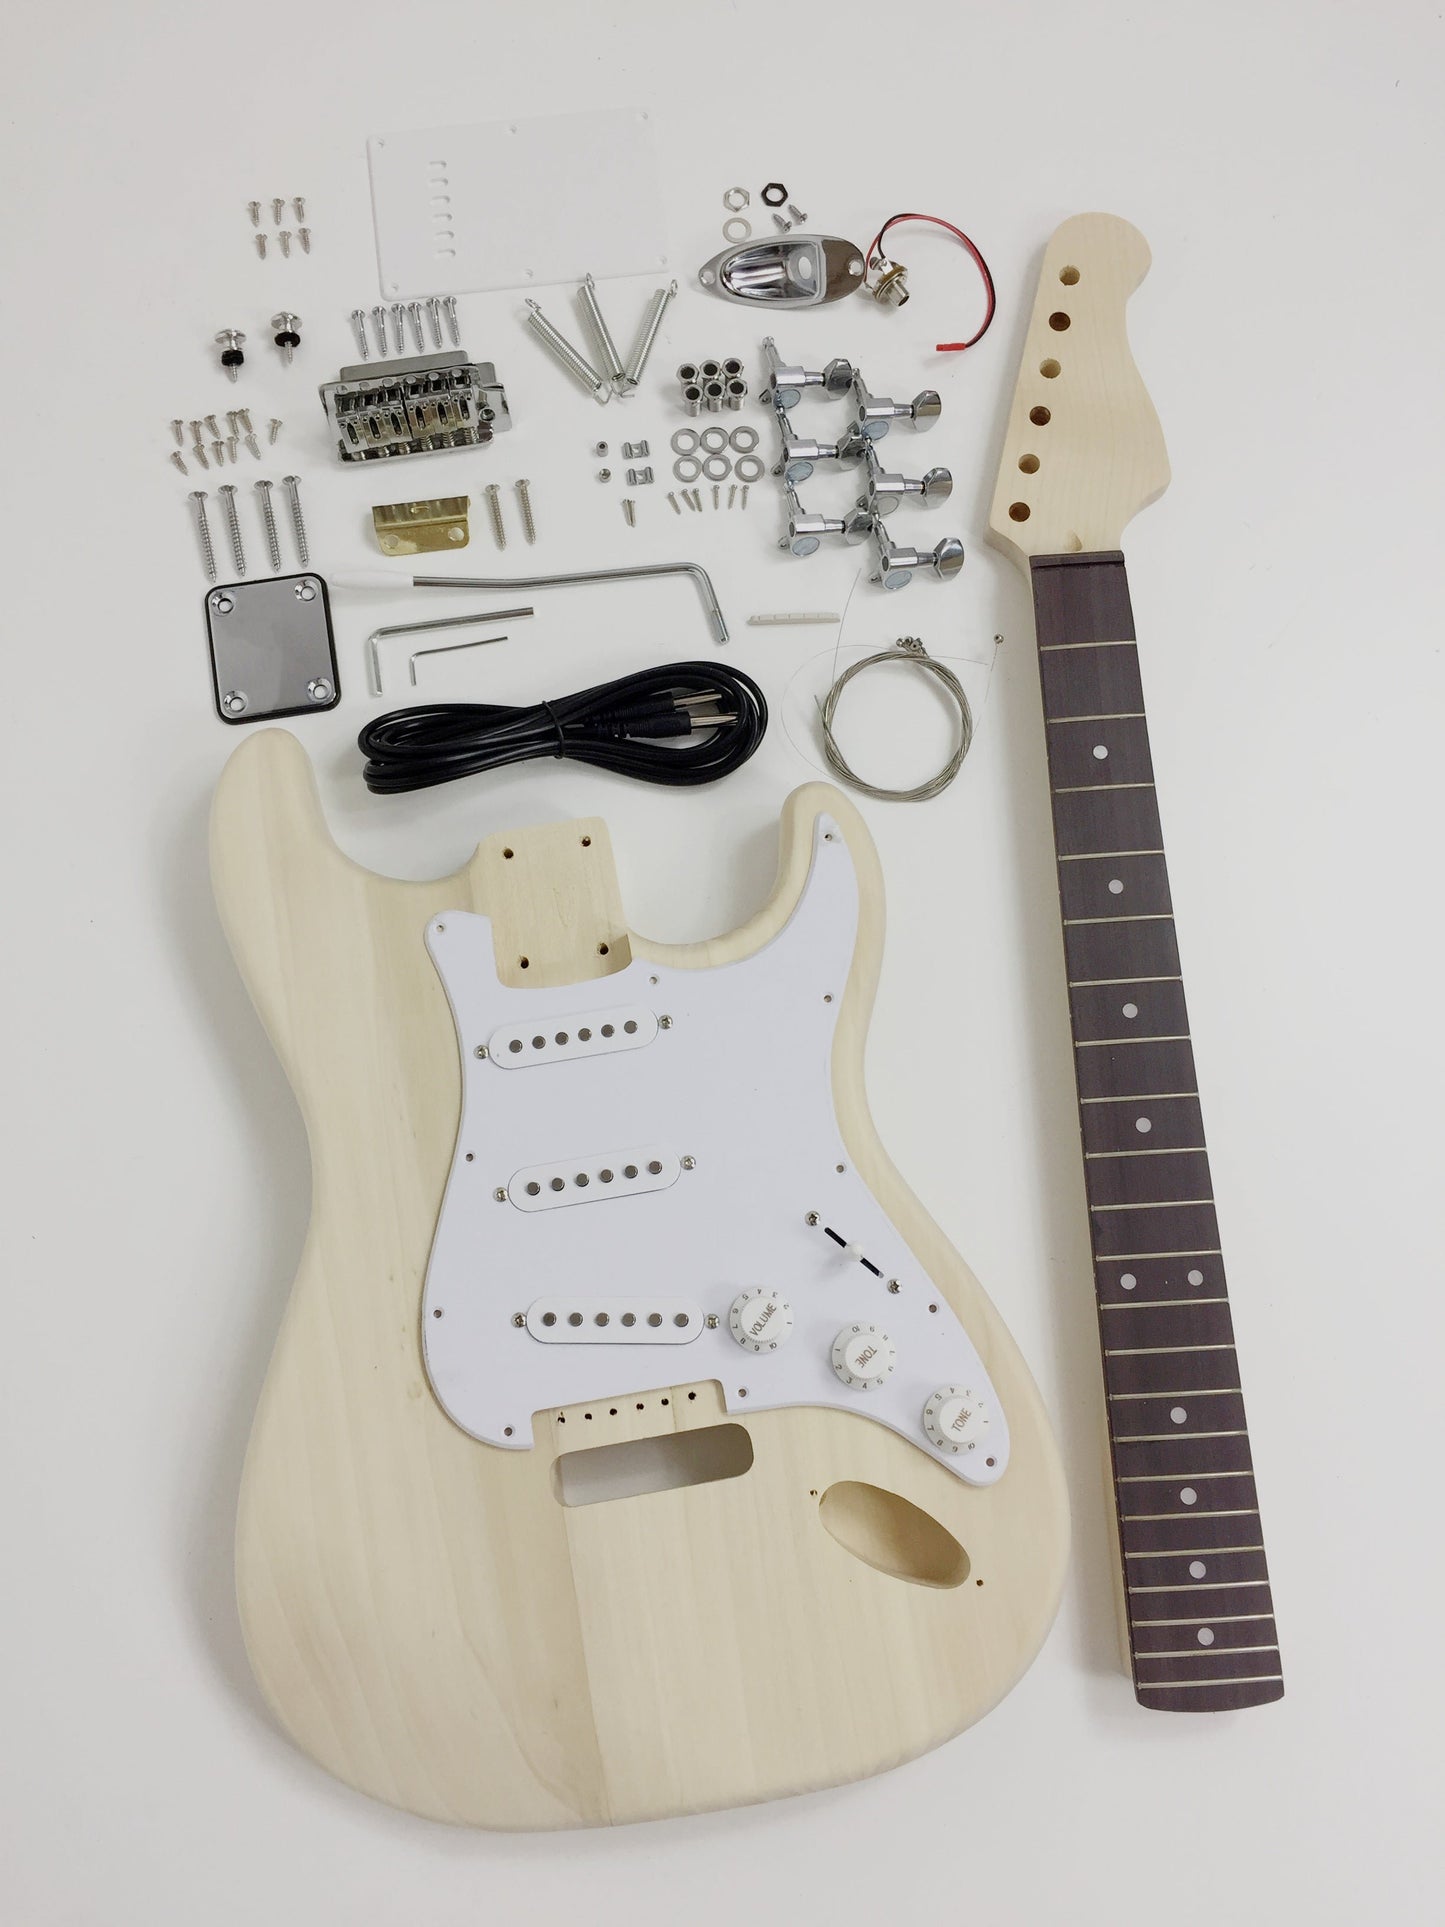 E200DIY Solid Basswood Body ST Style Electric Guitar DIY Kit, No-Soldering, SSS